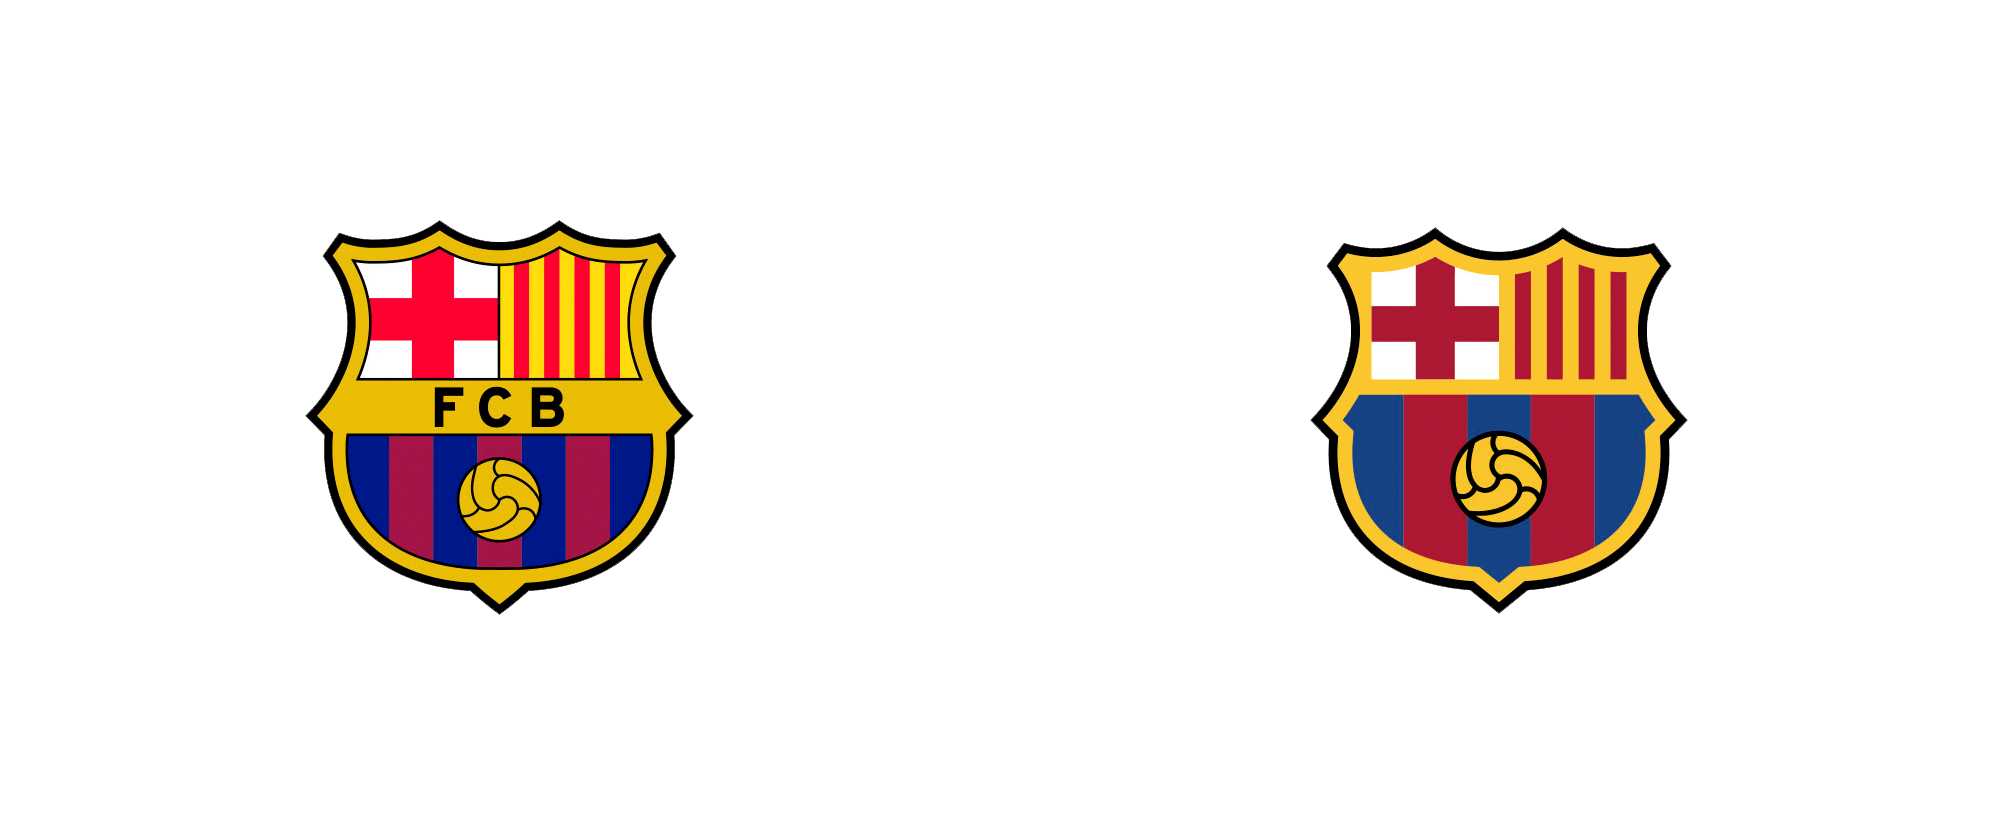 FCB Logo - Brand New: New Crest and Identity for FC Barcelona by Summa